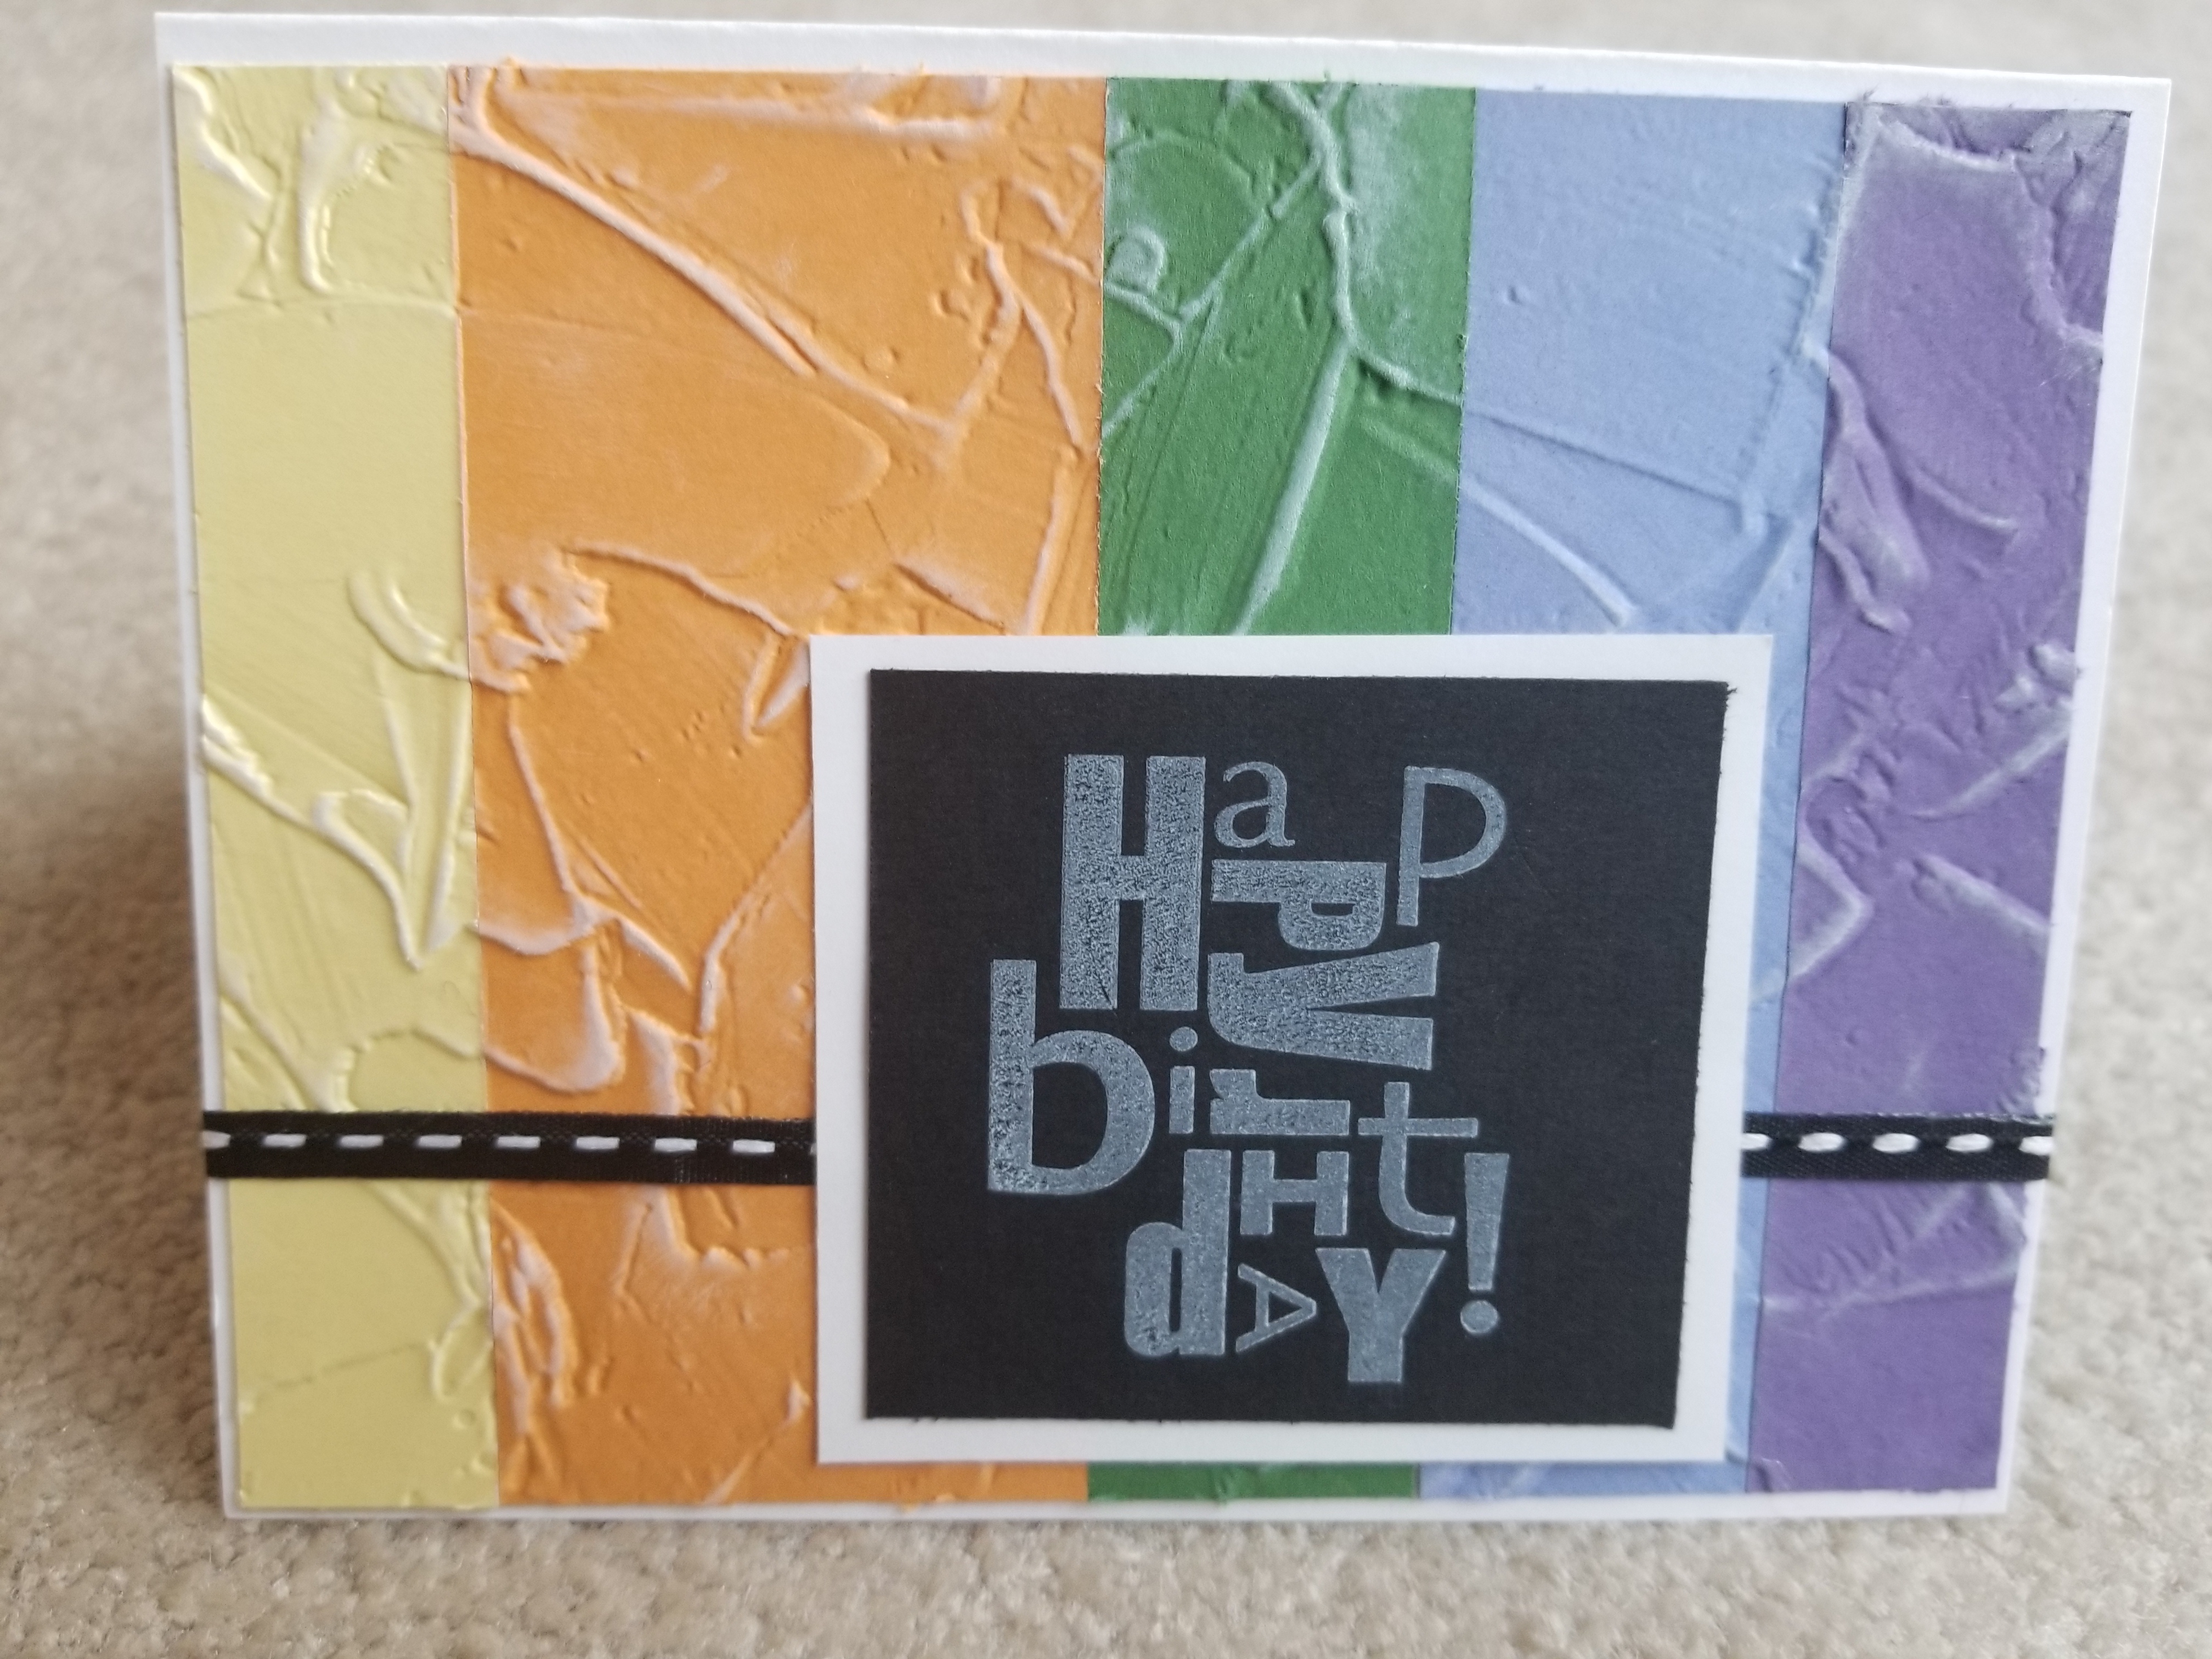 How to use Copic Markers on Scrapbooking projects